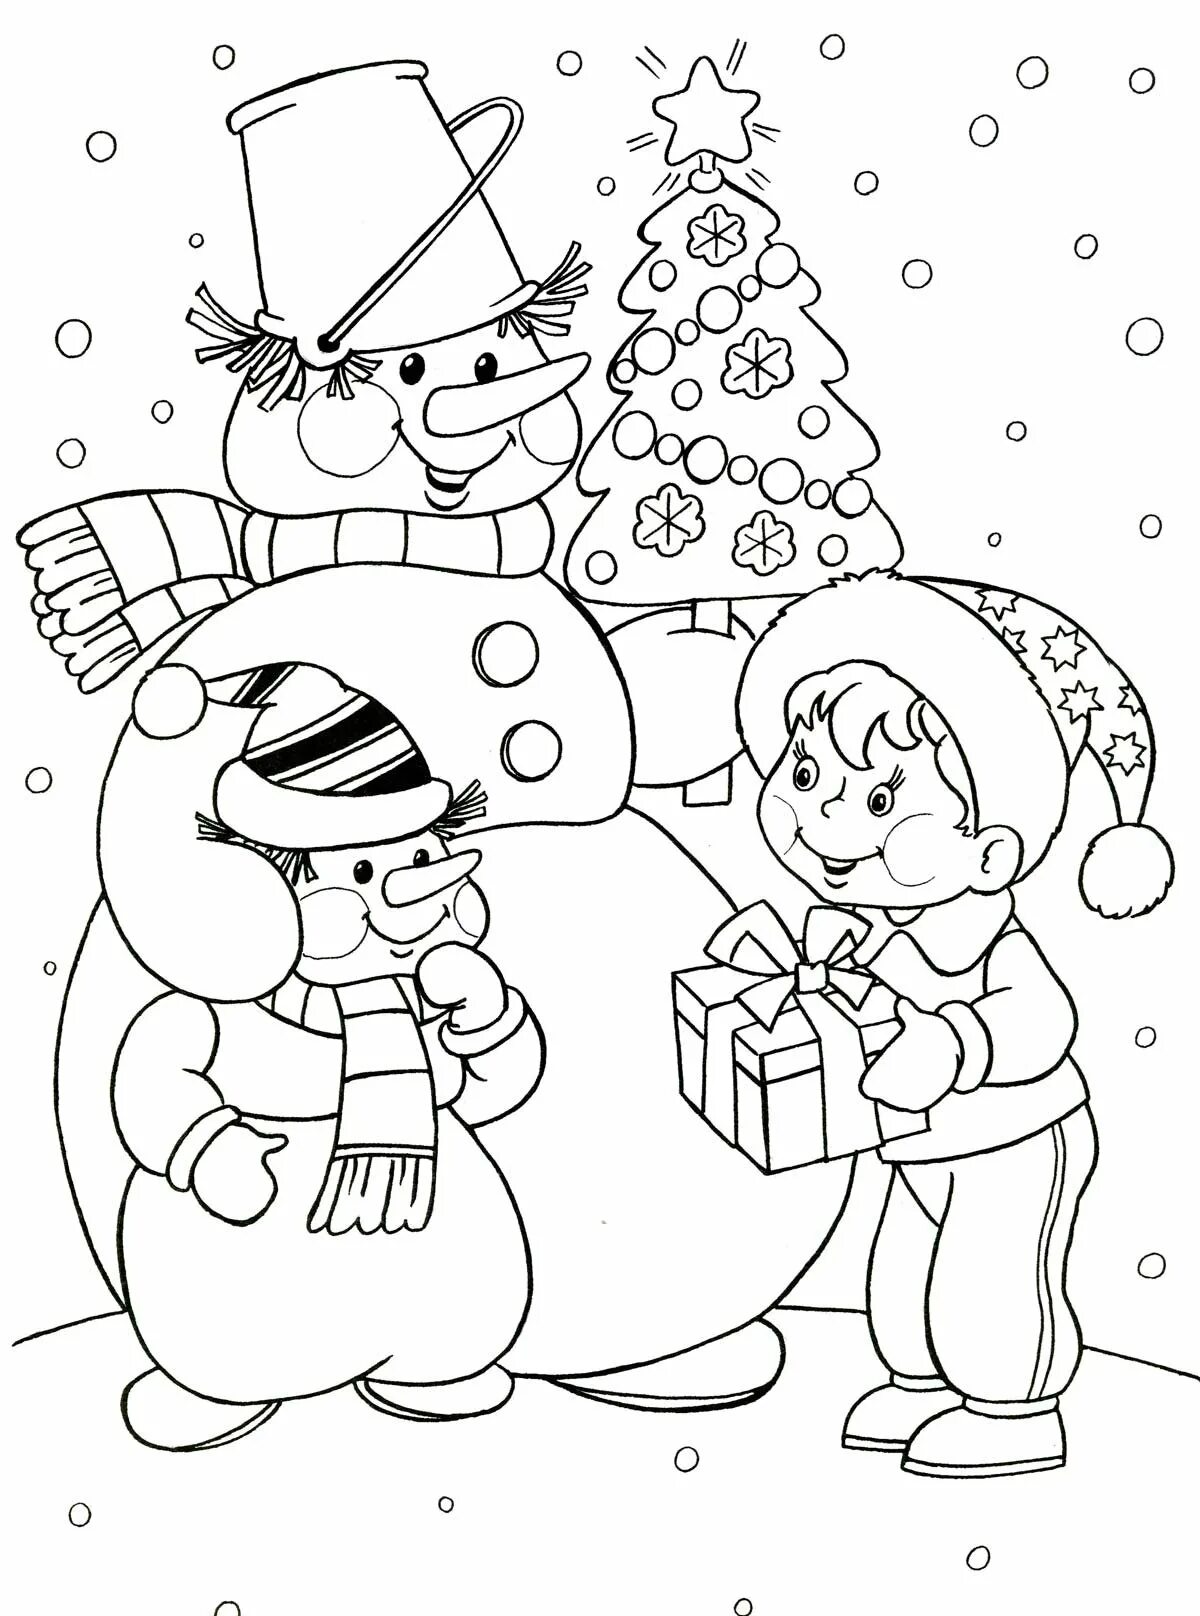 Adorable children's Christmas drawing